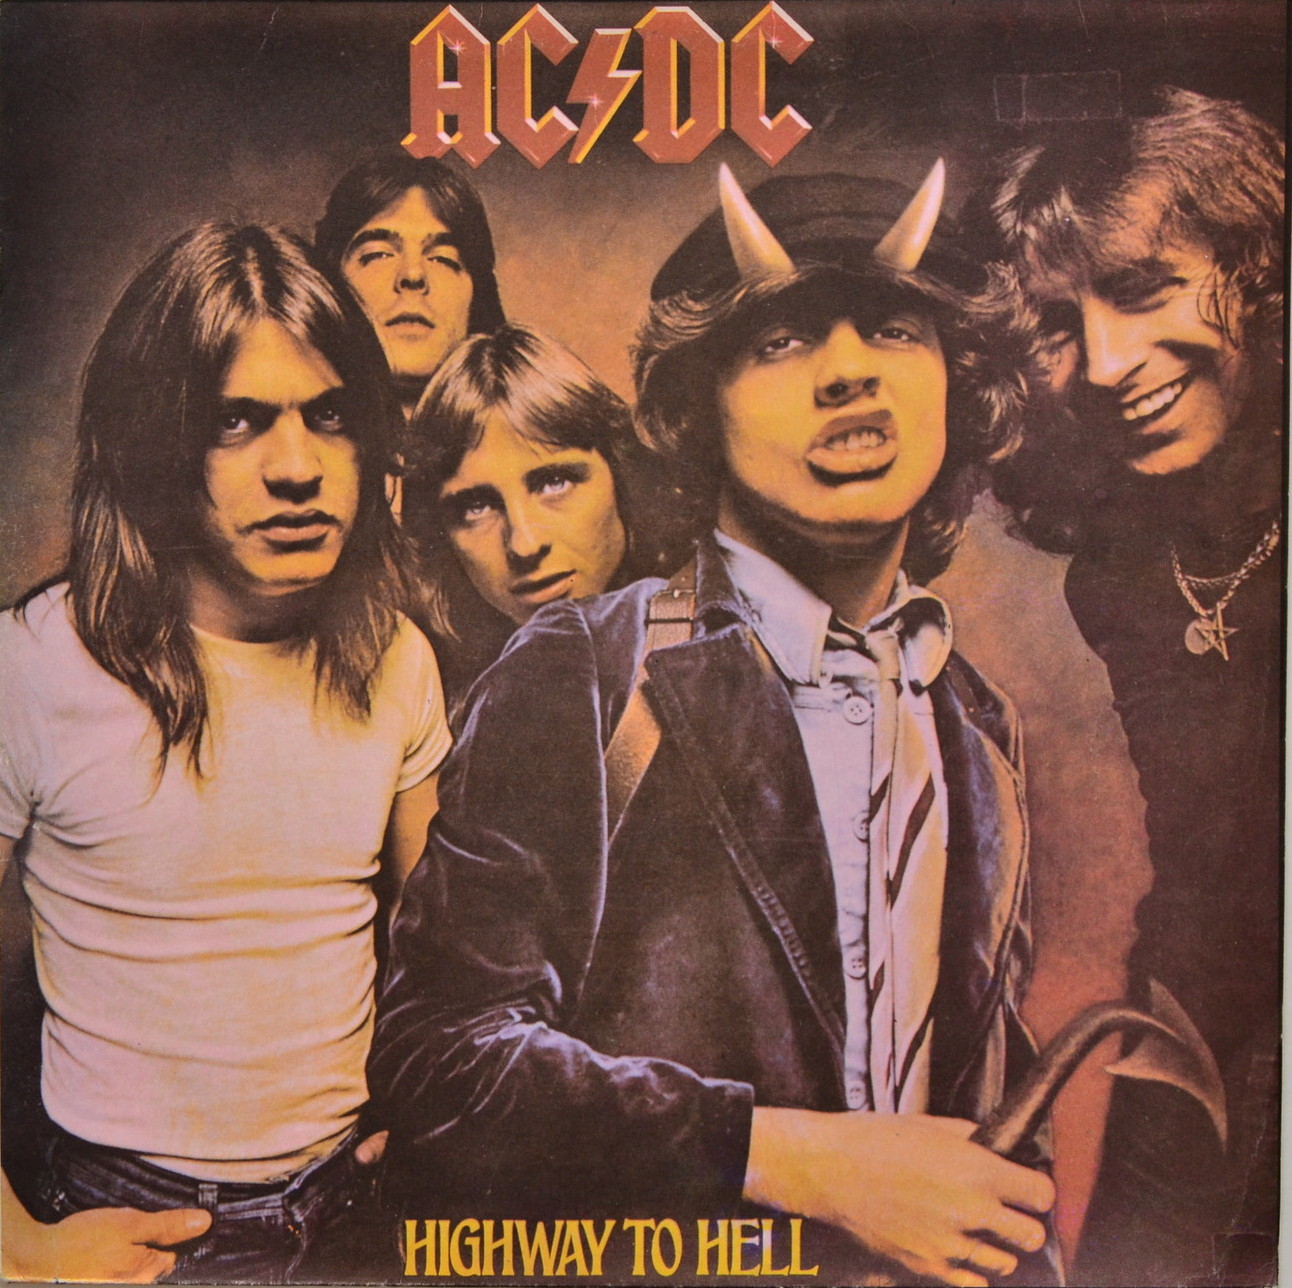 AC/DC. Highway To Hell